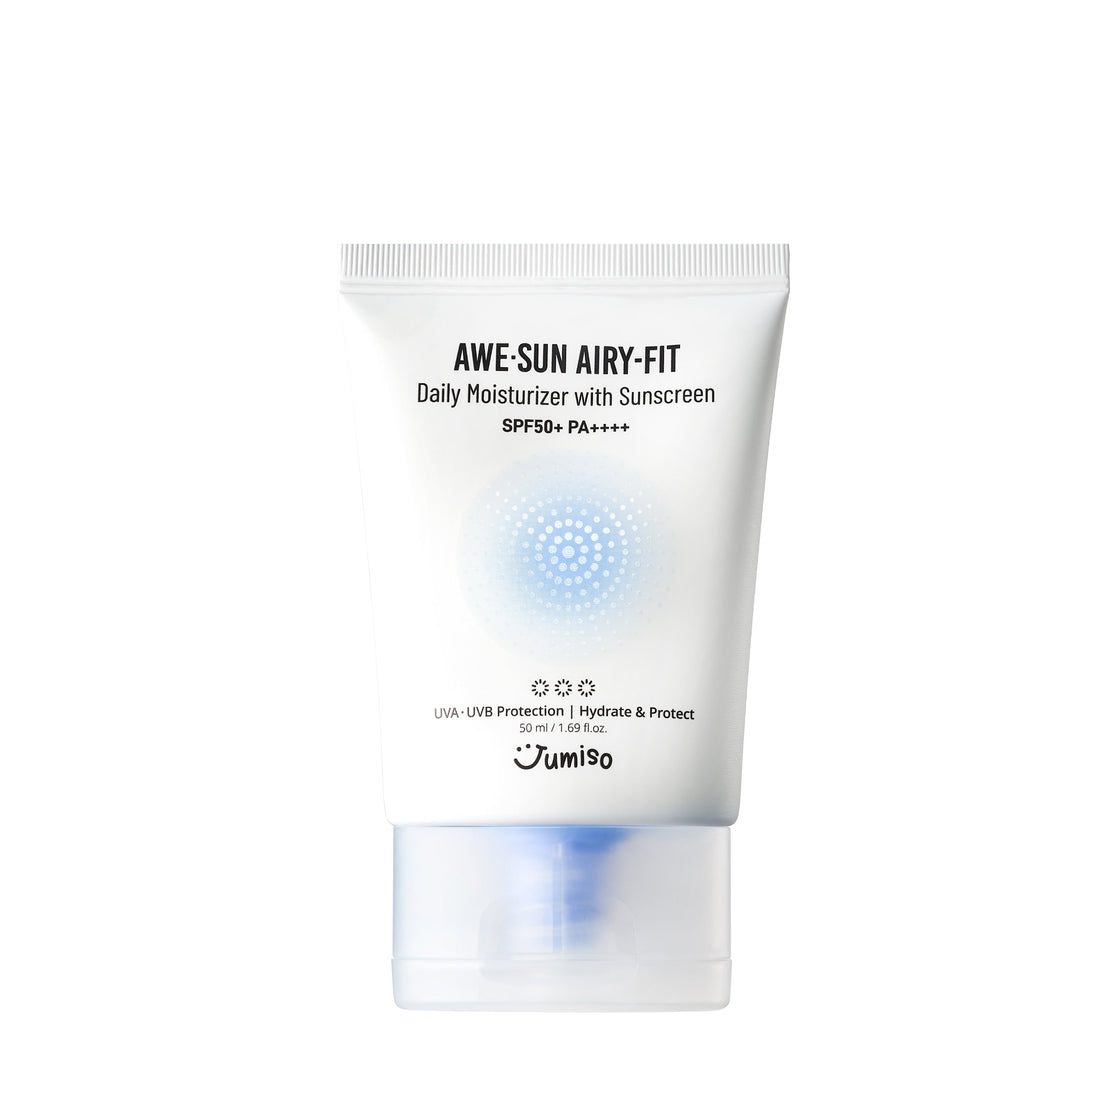 [FREE GIFT] AWE⋅SUN AIRY-FIT Daily Moisturizer with Sunscreen